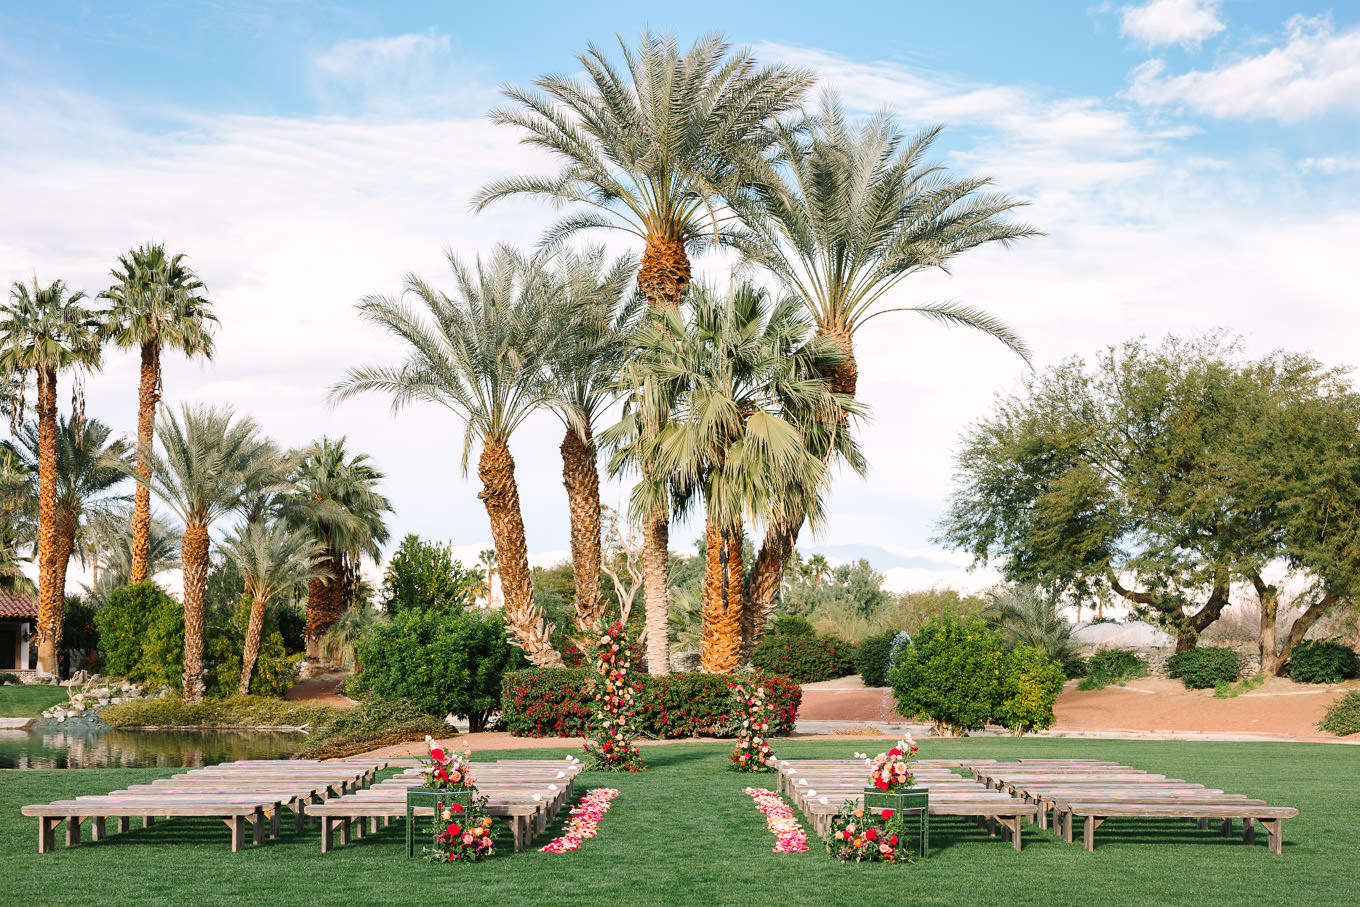 Bougainvillea Estate Palm Springs wedding | Wedding and elopement photography roundup | Los Angeles and Palm Springs photographer | #losangeleswedding #palmspringswedding #elopementphotographer Source: Mary Costa Photography | Los Angeles